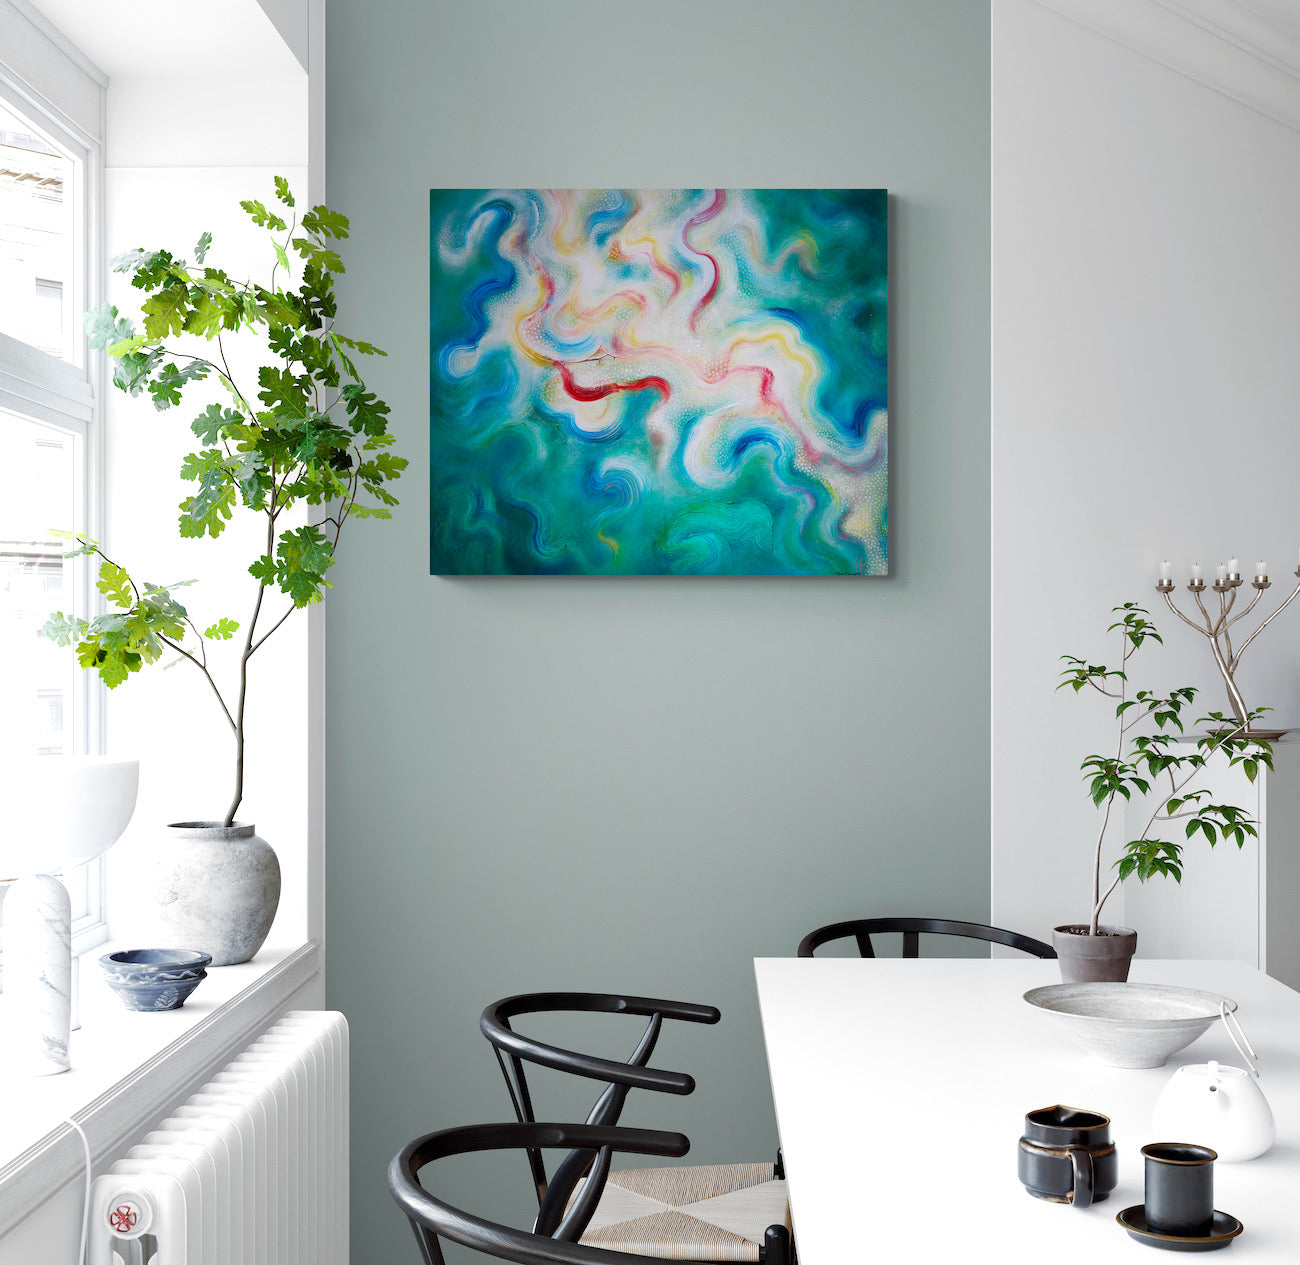 Large green abstract painting on canvas